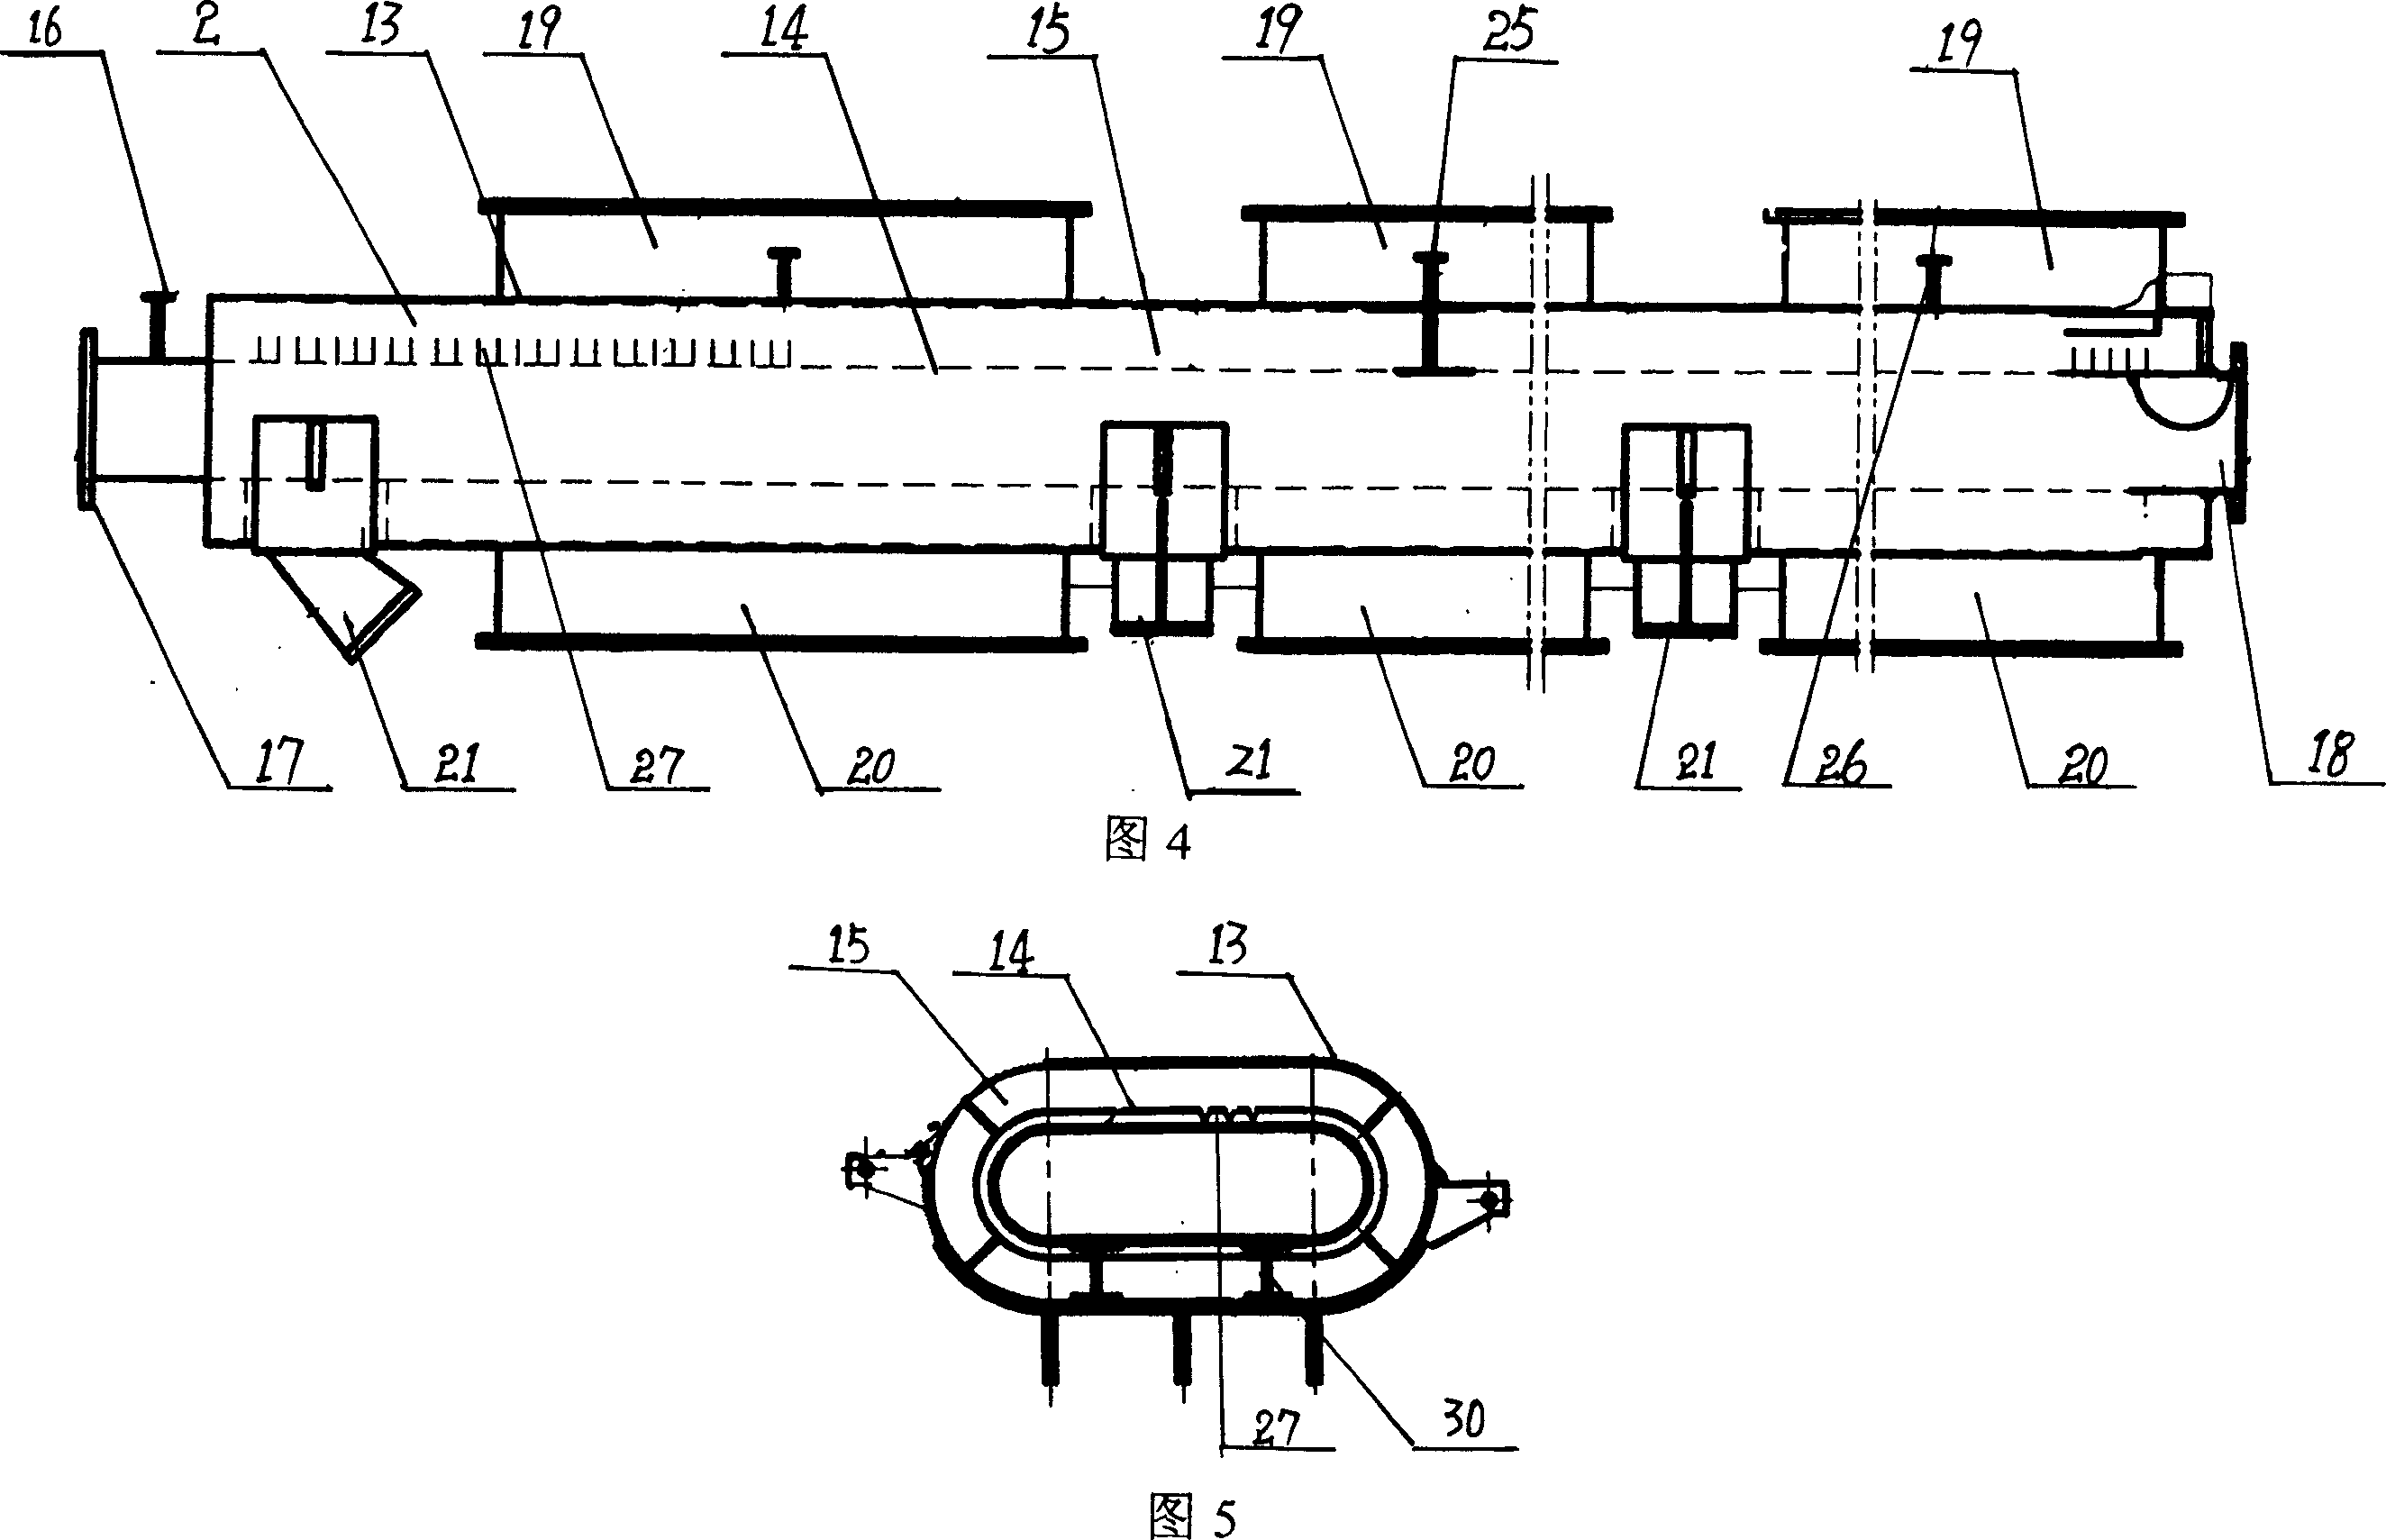 Waste tyre cracking process and apparatus